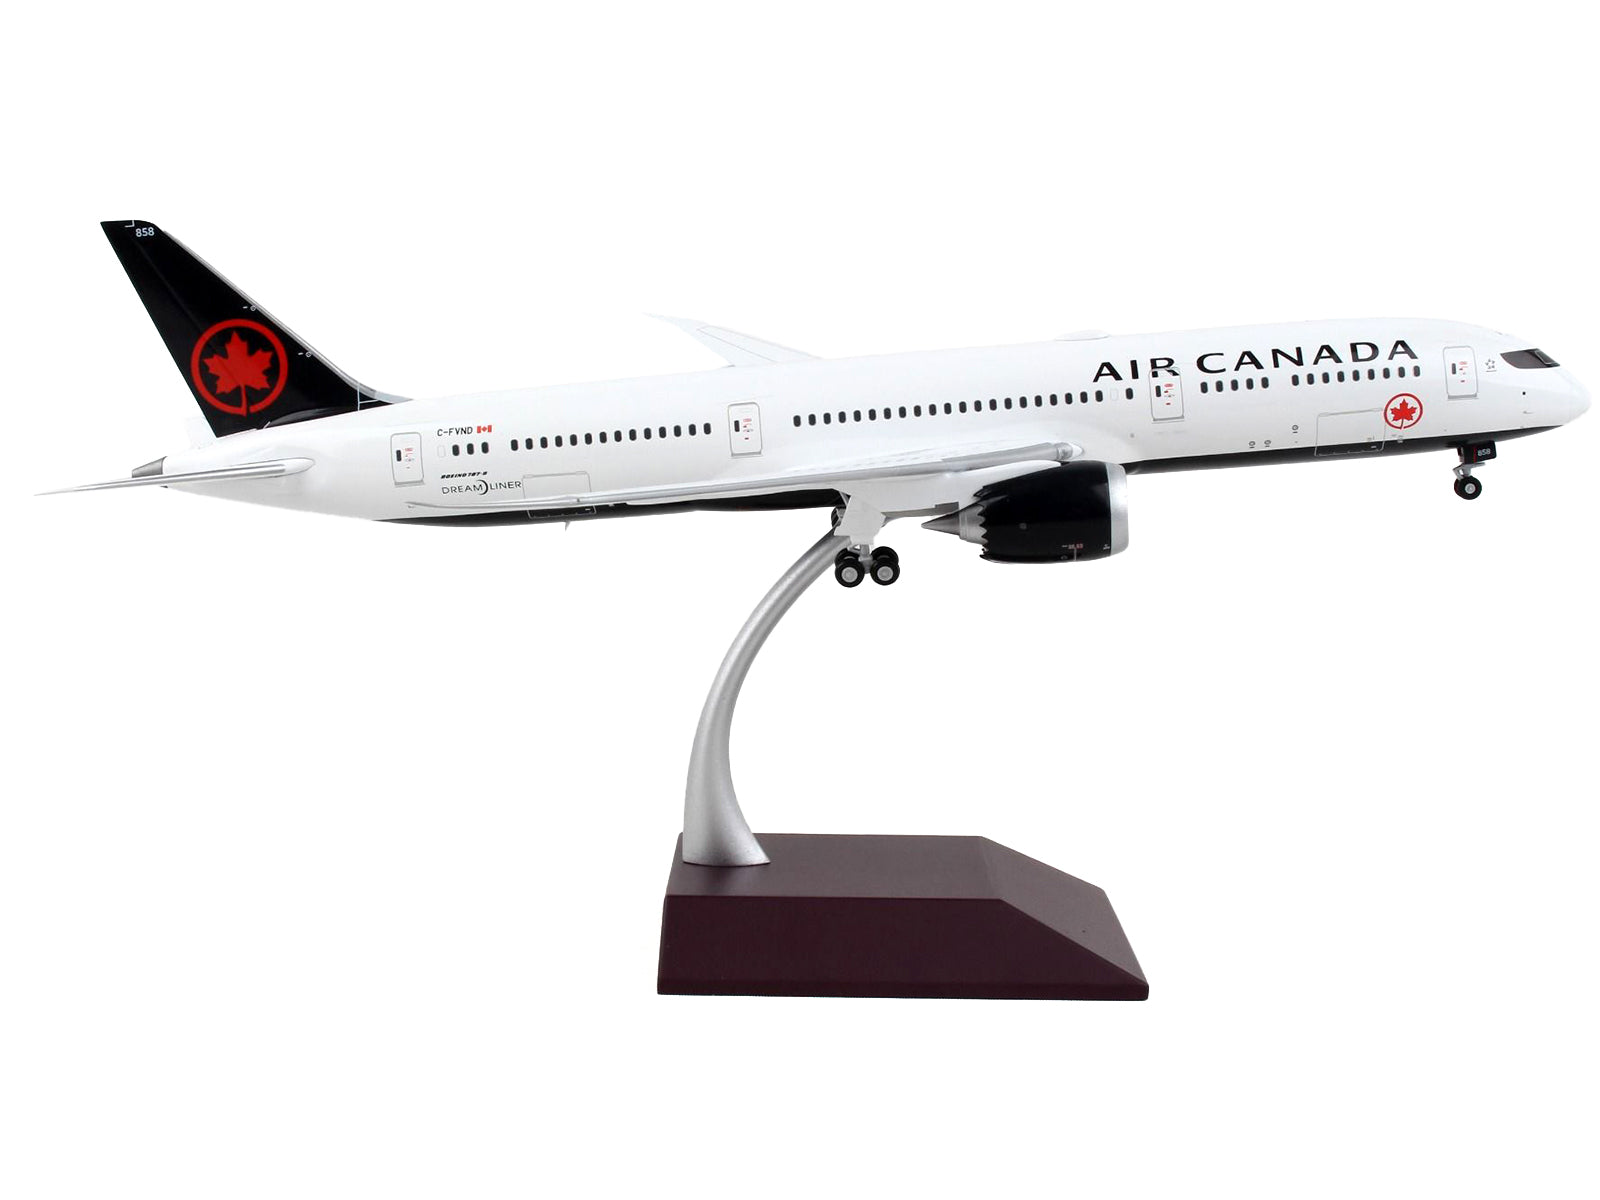 Boeing 787-9 Commercial Aircraft "Air Canada" White with Black Tail "Gemini 200" Series 1/200 Diecast Model Airplane by GeminiJets